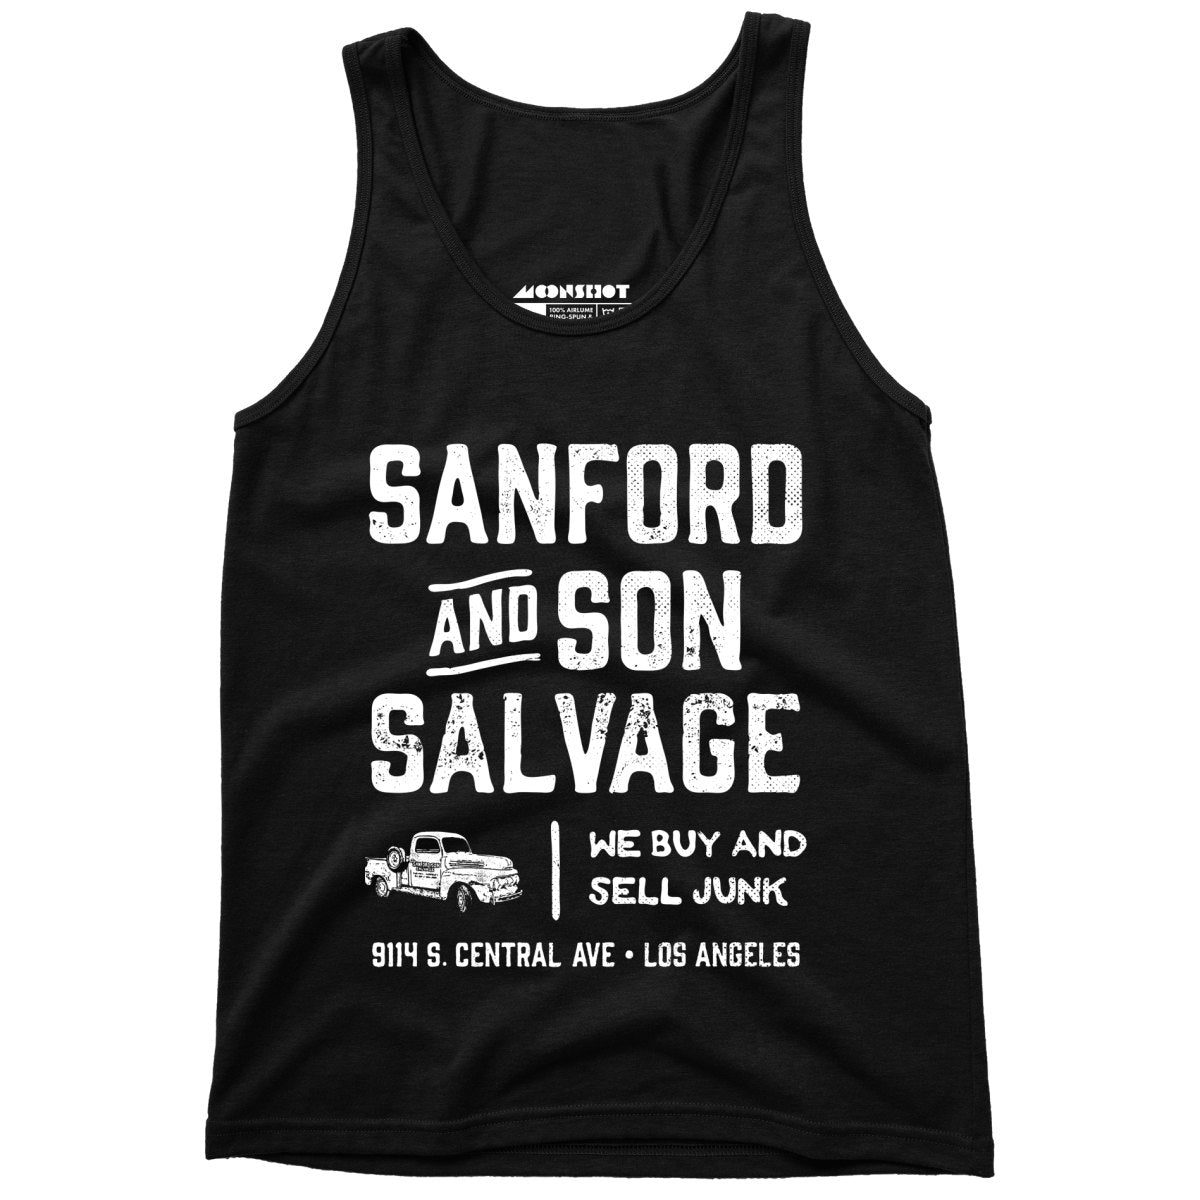 Sanford and Son Salvage - Unisex Tank Top